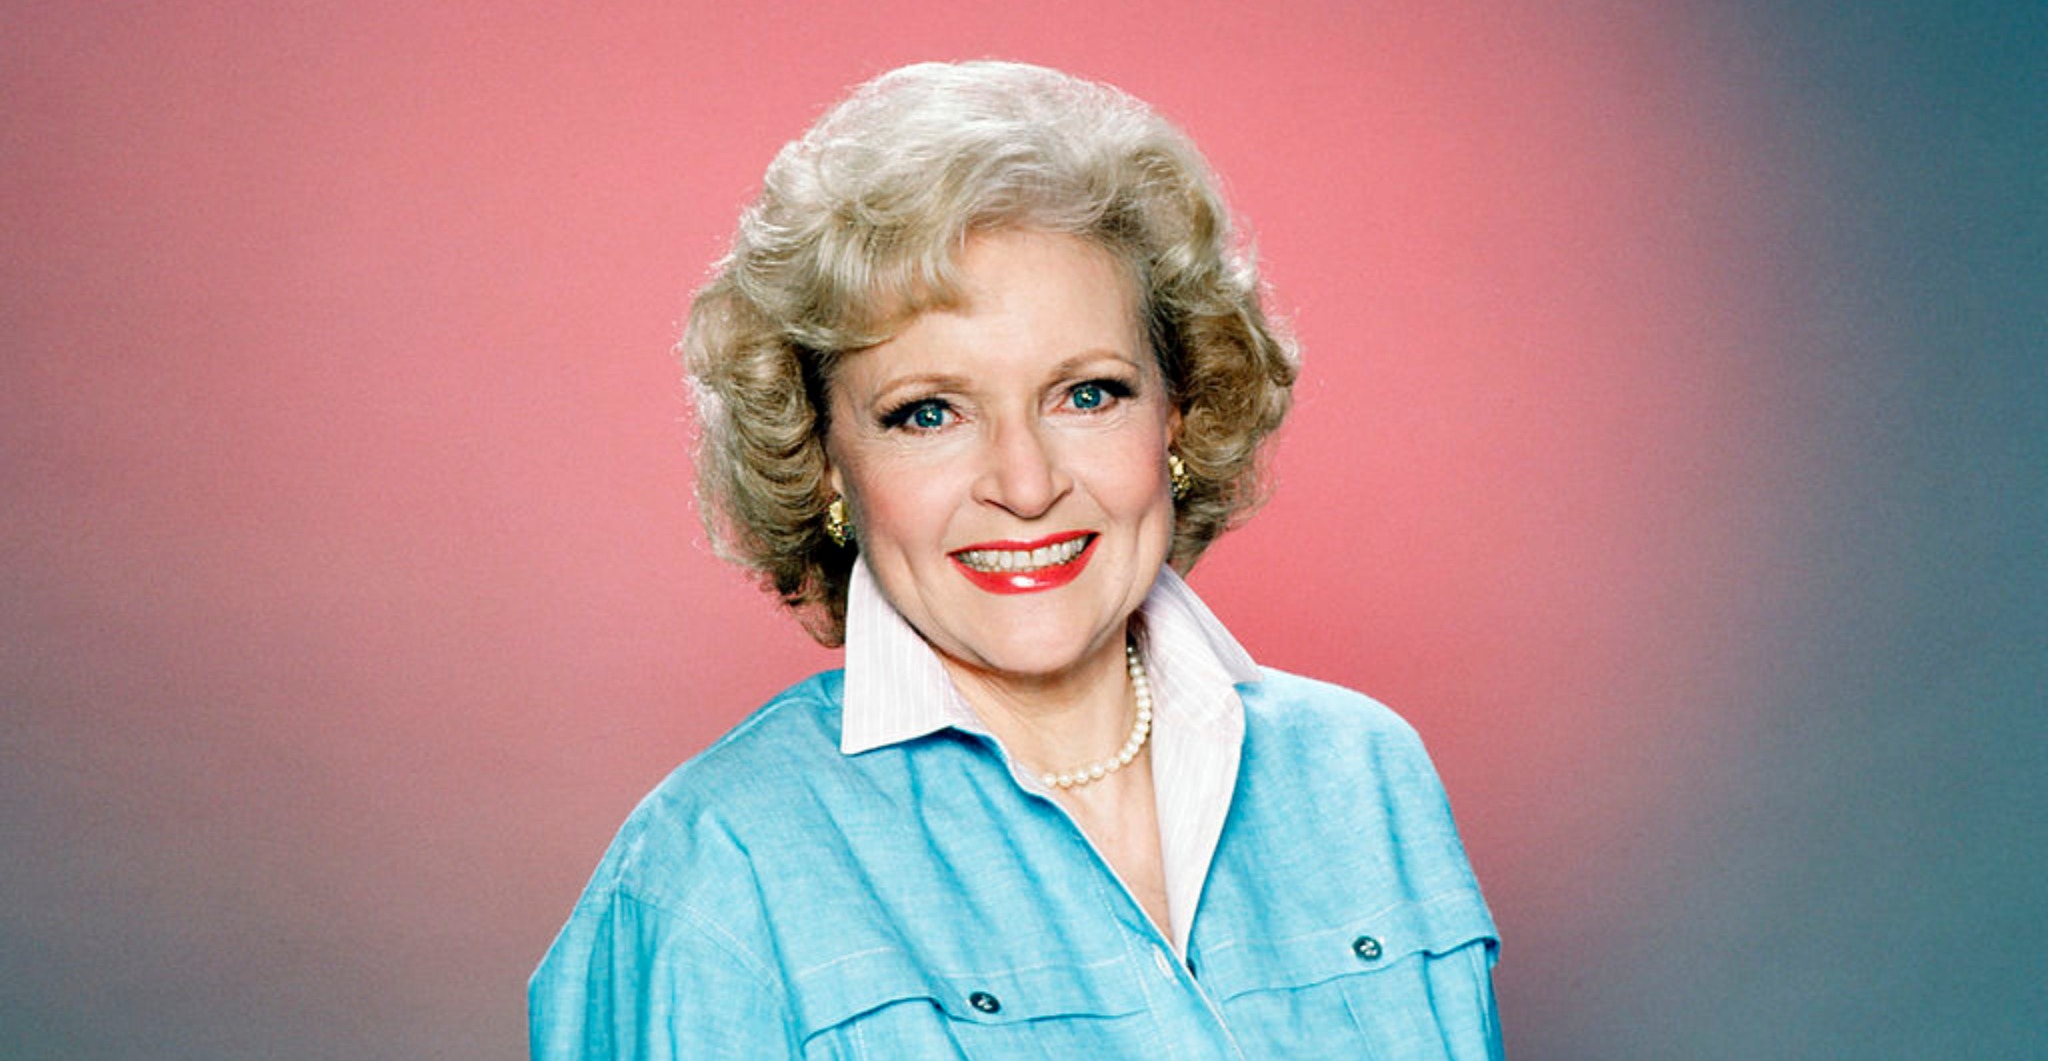 Betty White during the first season of Golden Girls.  (Photo by: Herb Ball/NBCU Photo Bank/NBCUniversal via Getty Images via Getty Images)